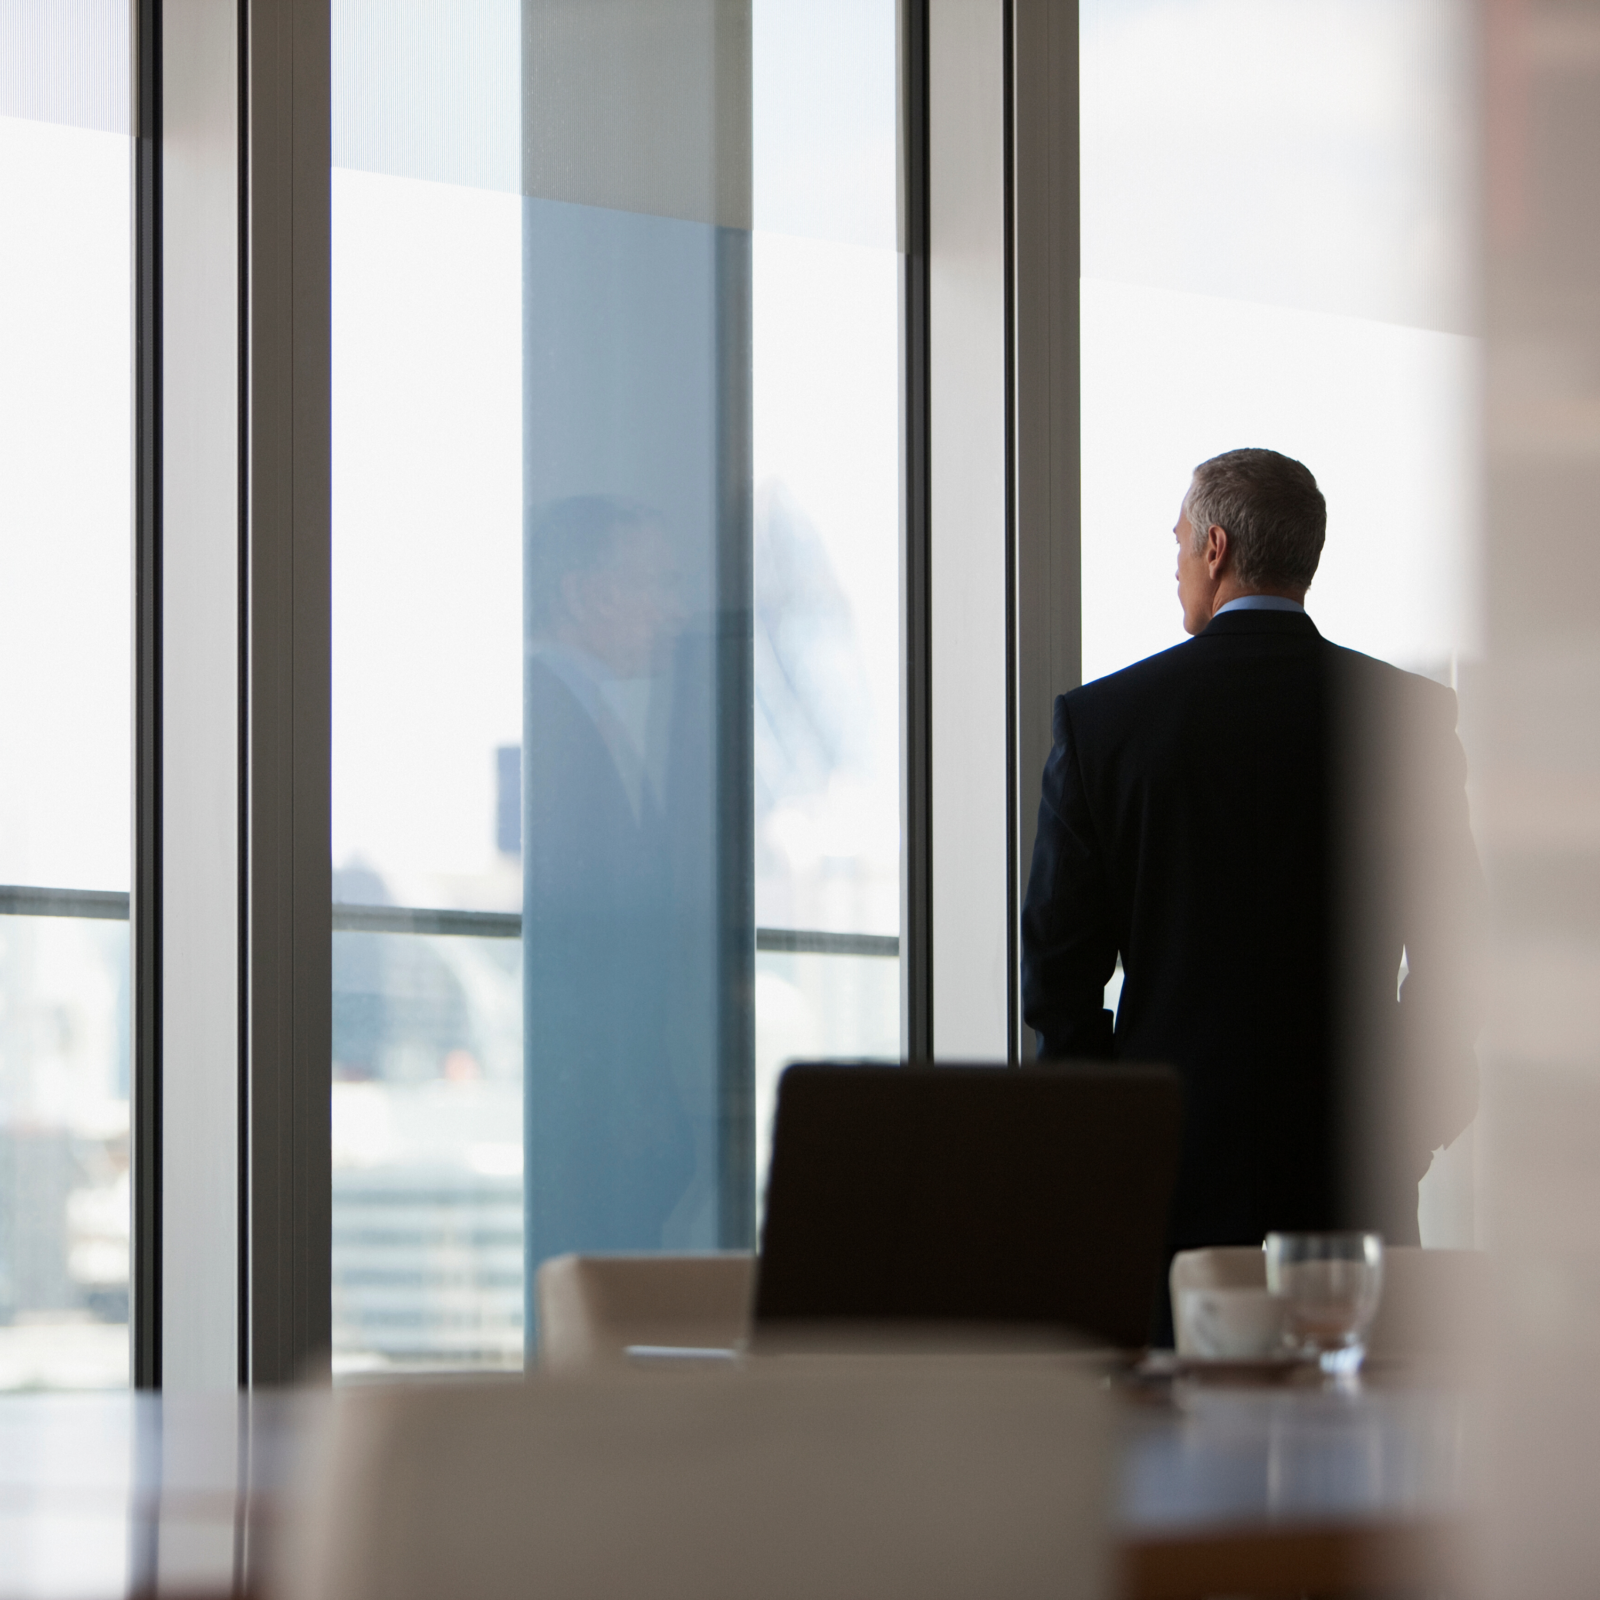 Businessman looking out of window